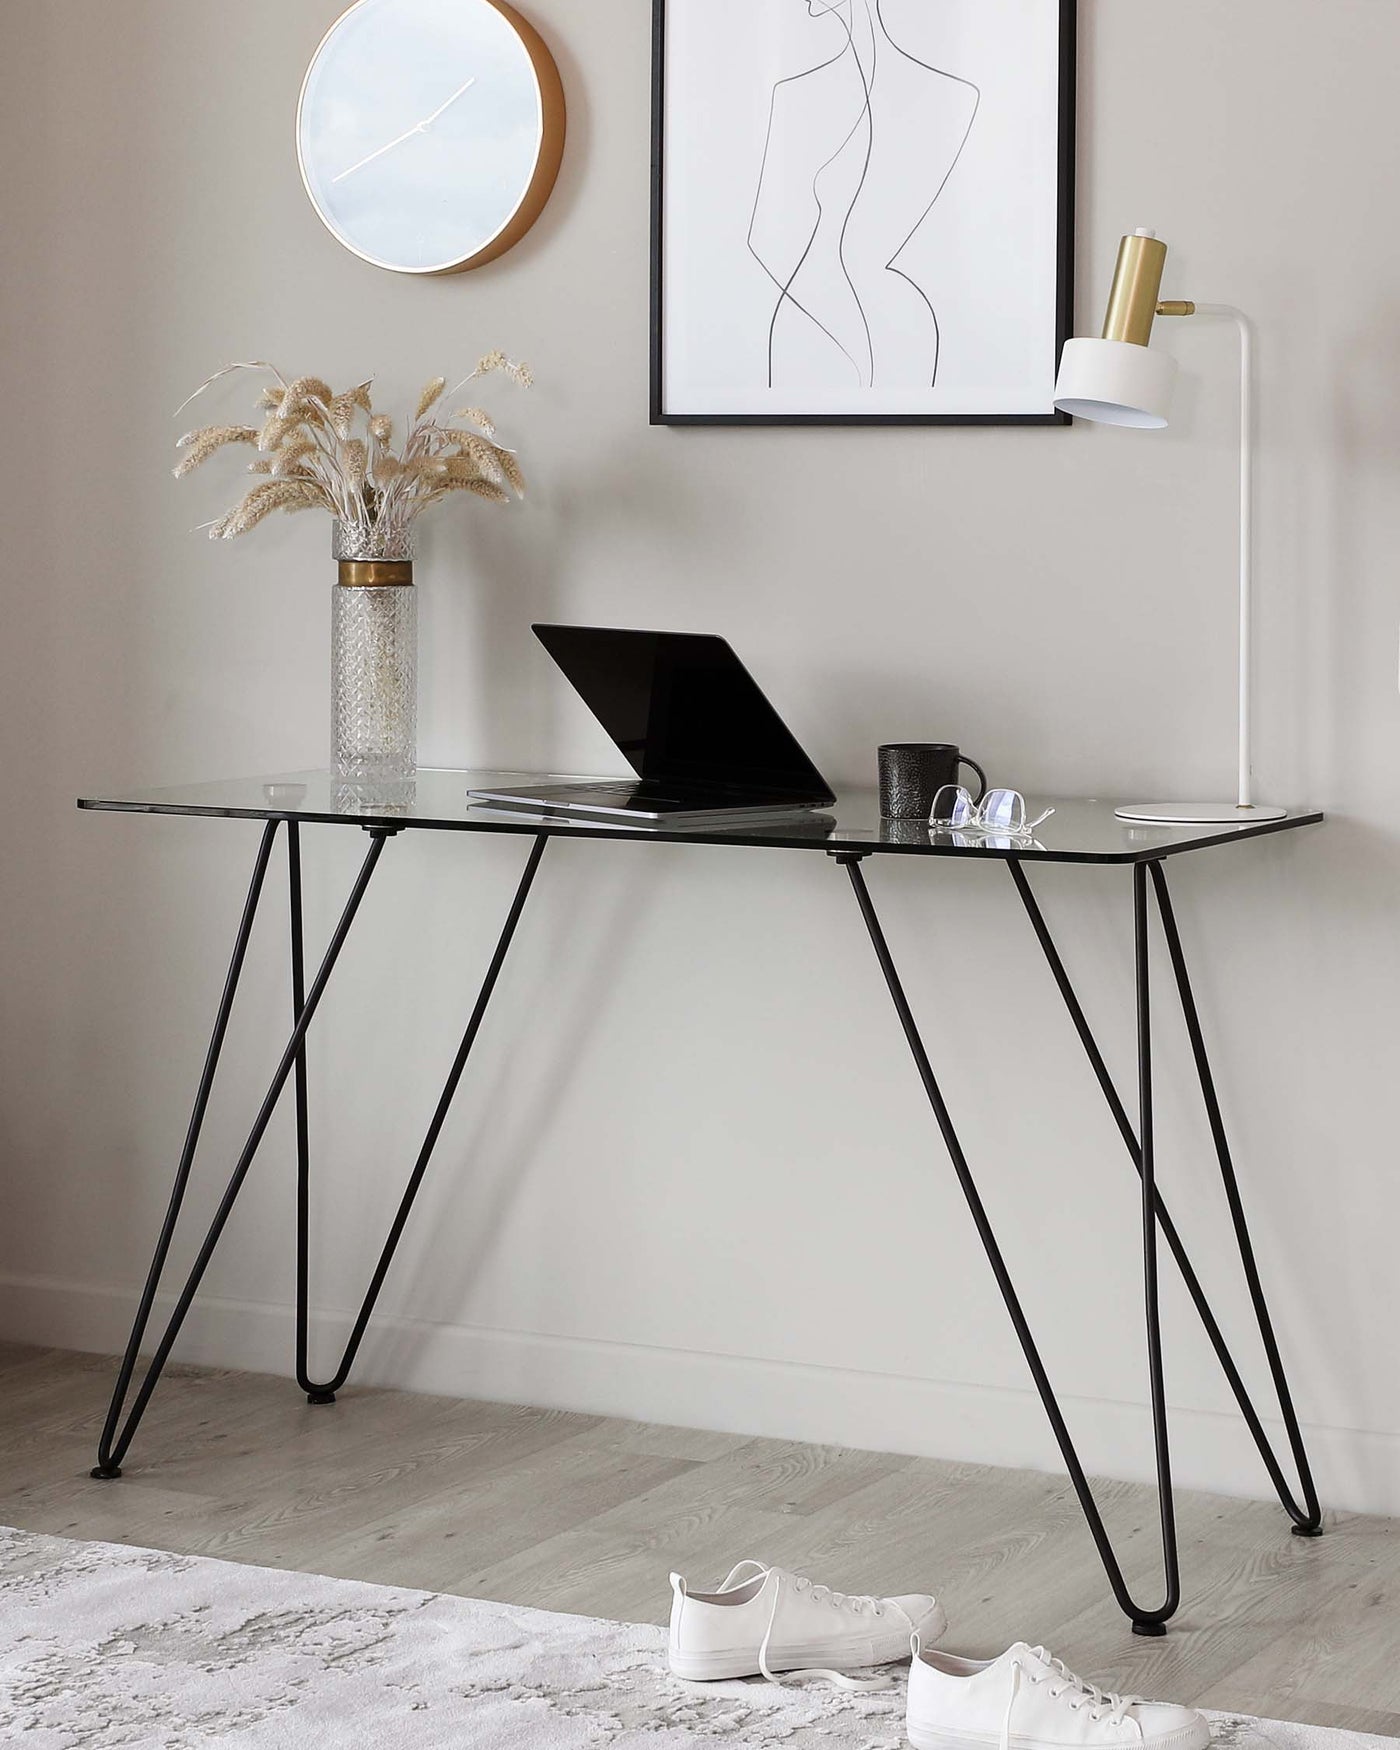 A modern minimalist black metal frame desk with a glass top, featuring sleek, angled legs.